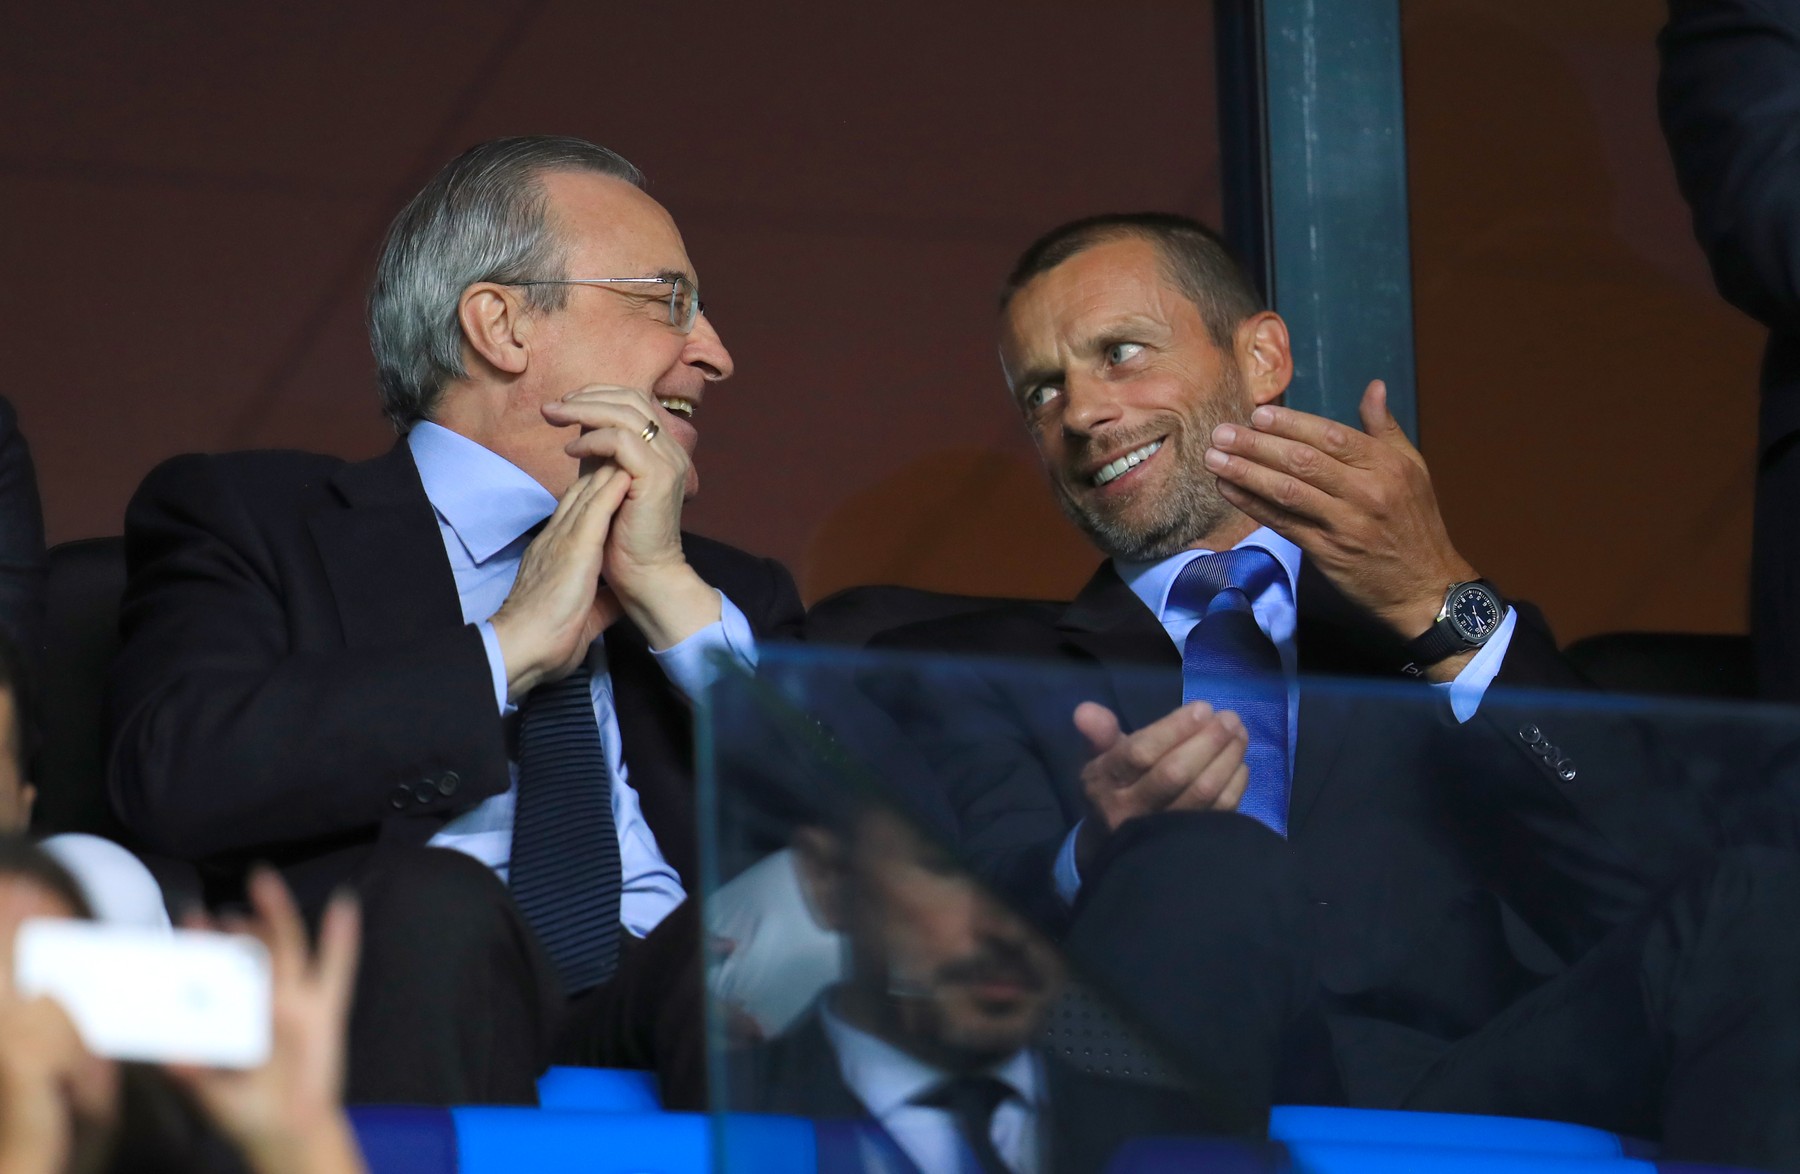 Real Madrid President Florentino Perez (left) and UEFA President Aleksander Ceferin in the stands,Image: 382768481, License: Rights-managed, Restrictions: , Model Release: no, Credit line: Mike Egerton / PA Images / Profimedia